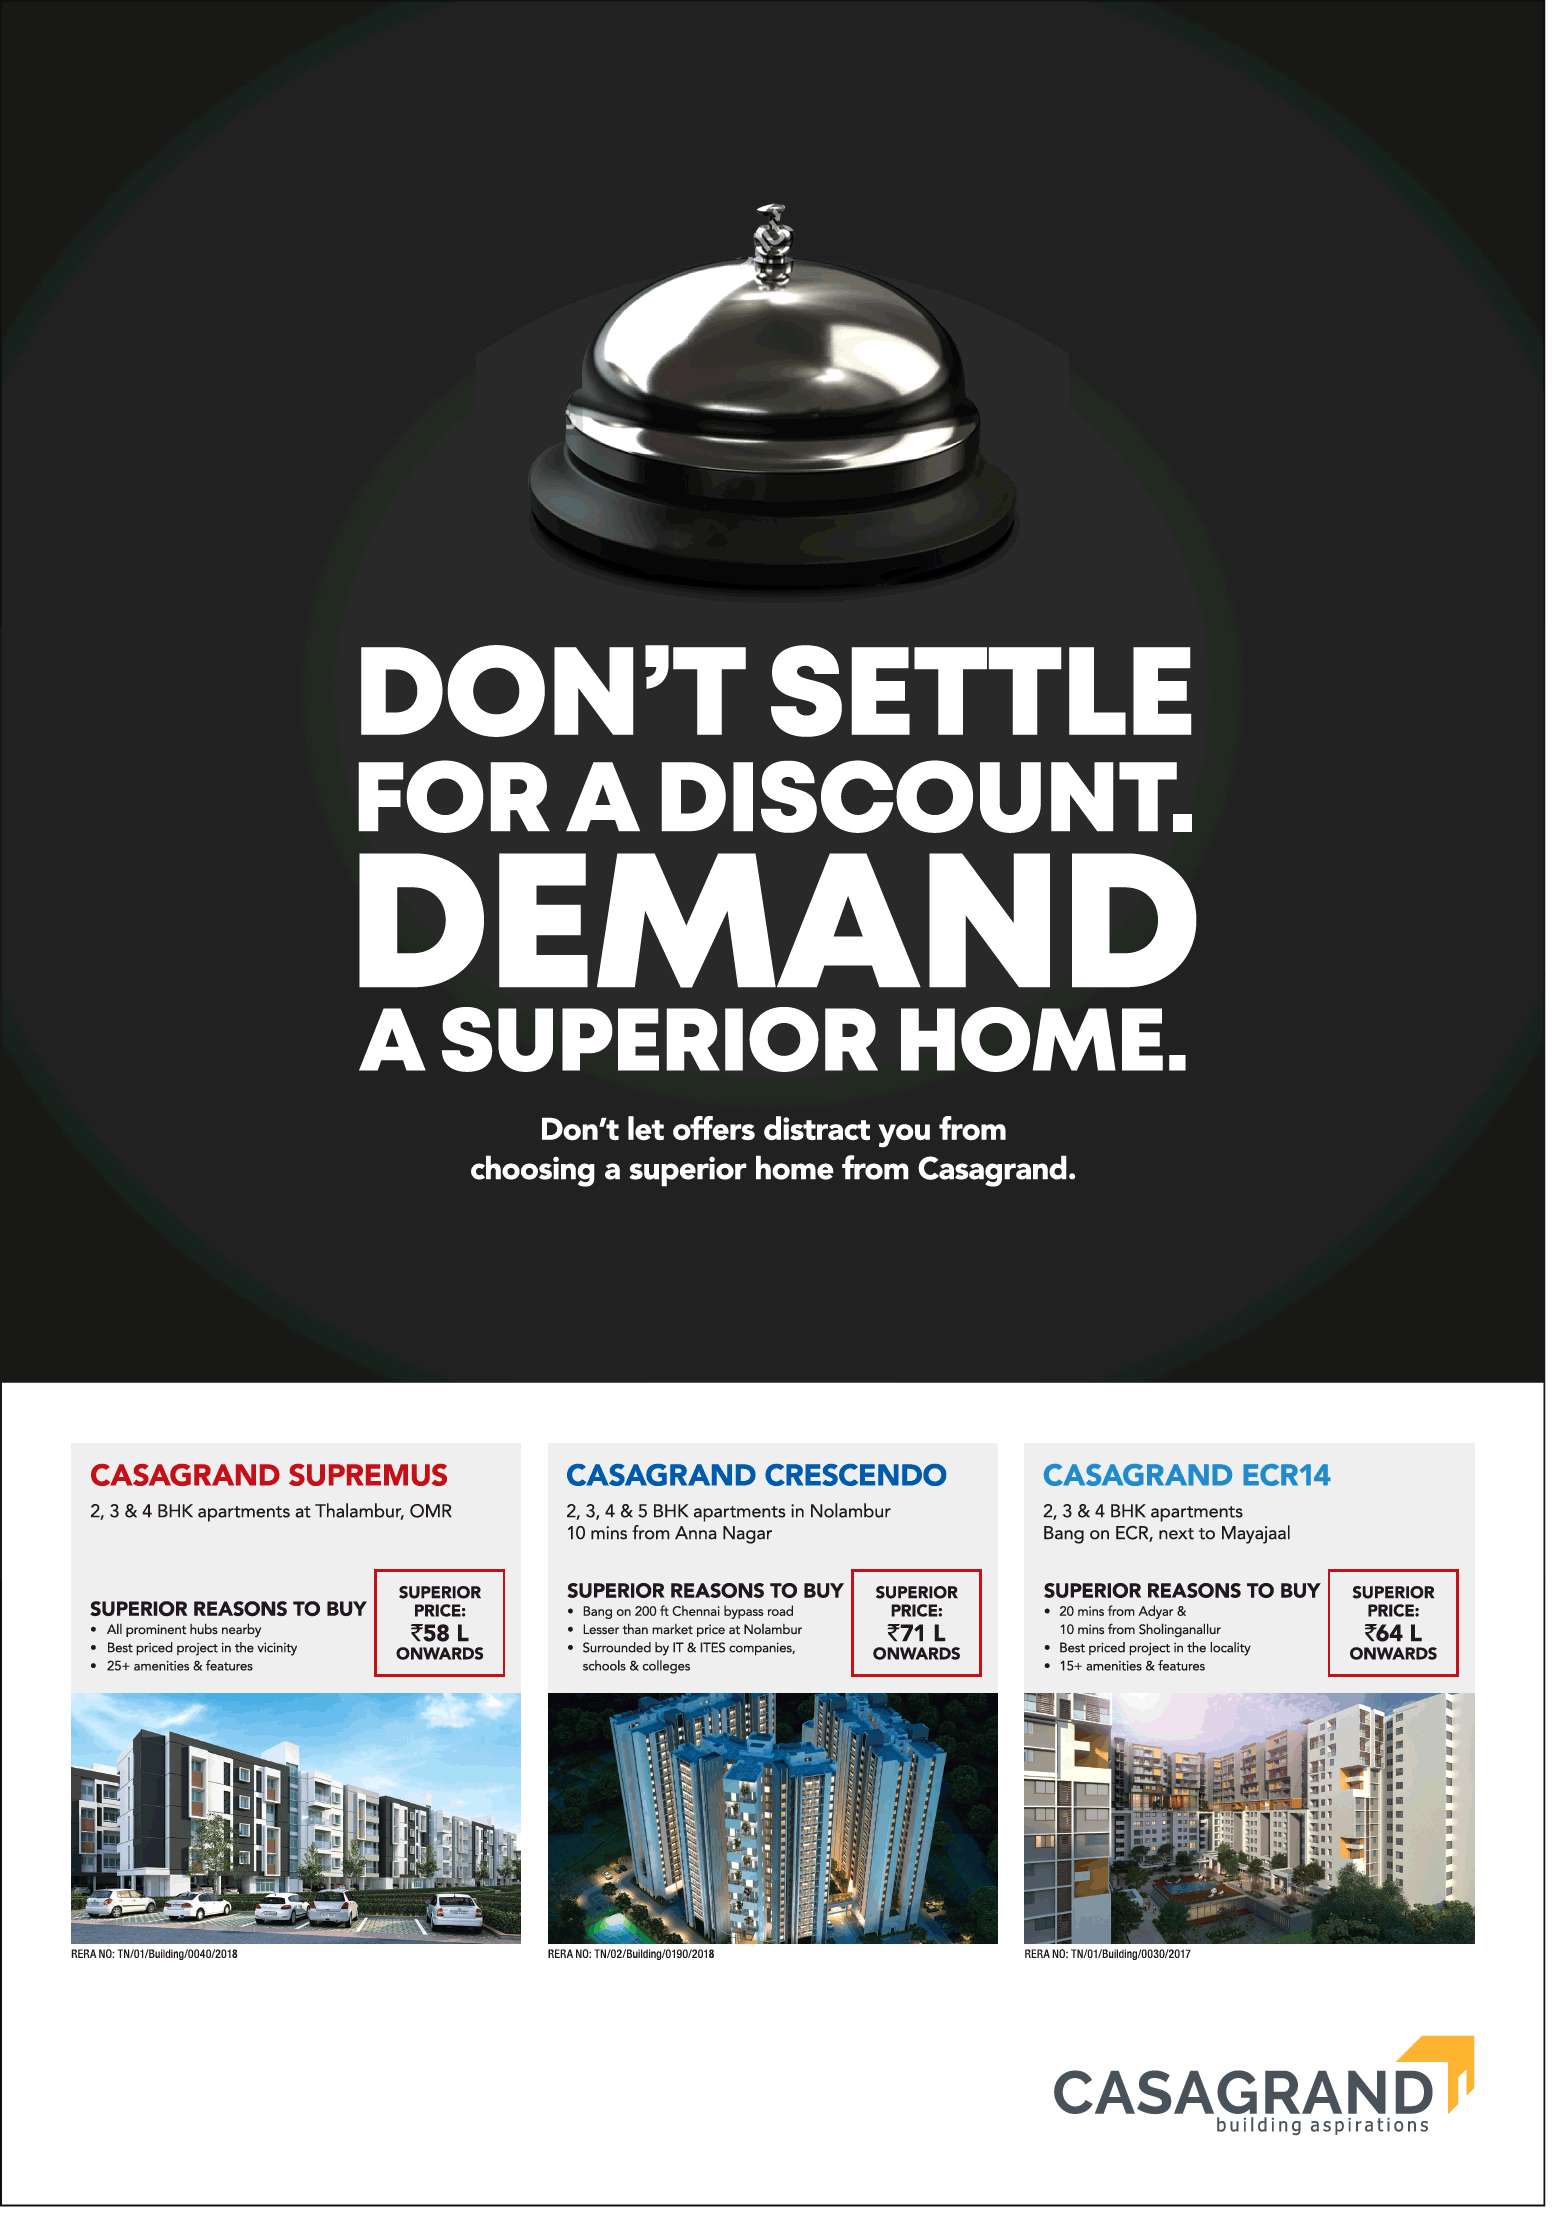 Don't settle for a discount, demand for a superior home at Casagrand in Chennai